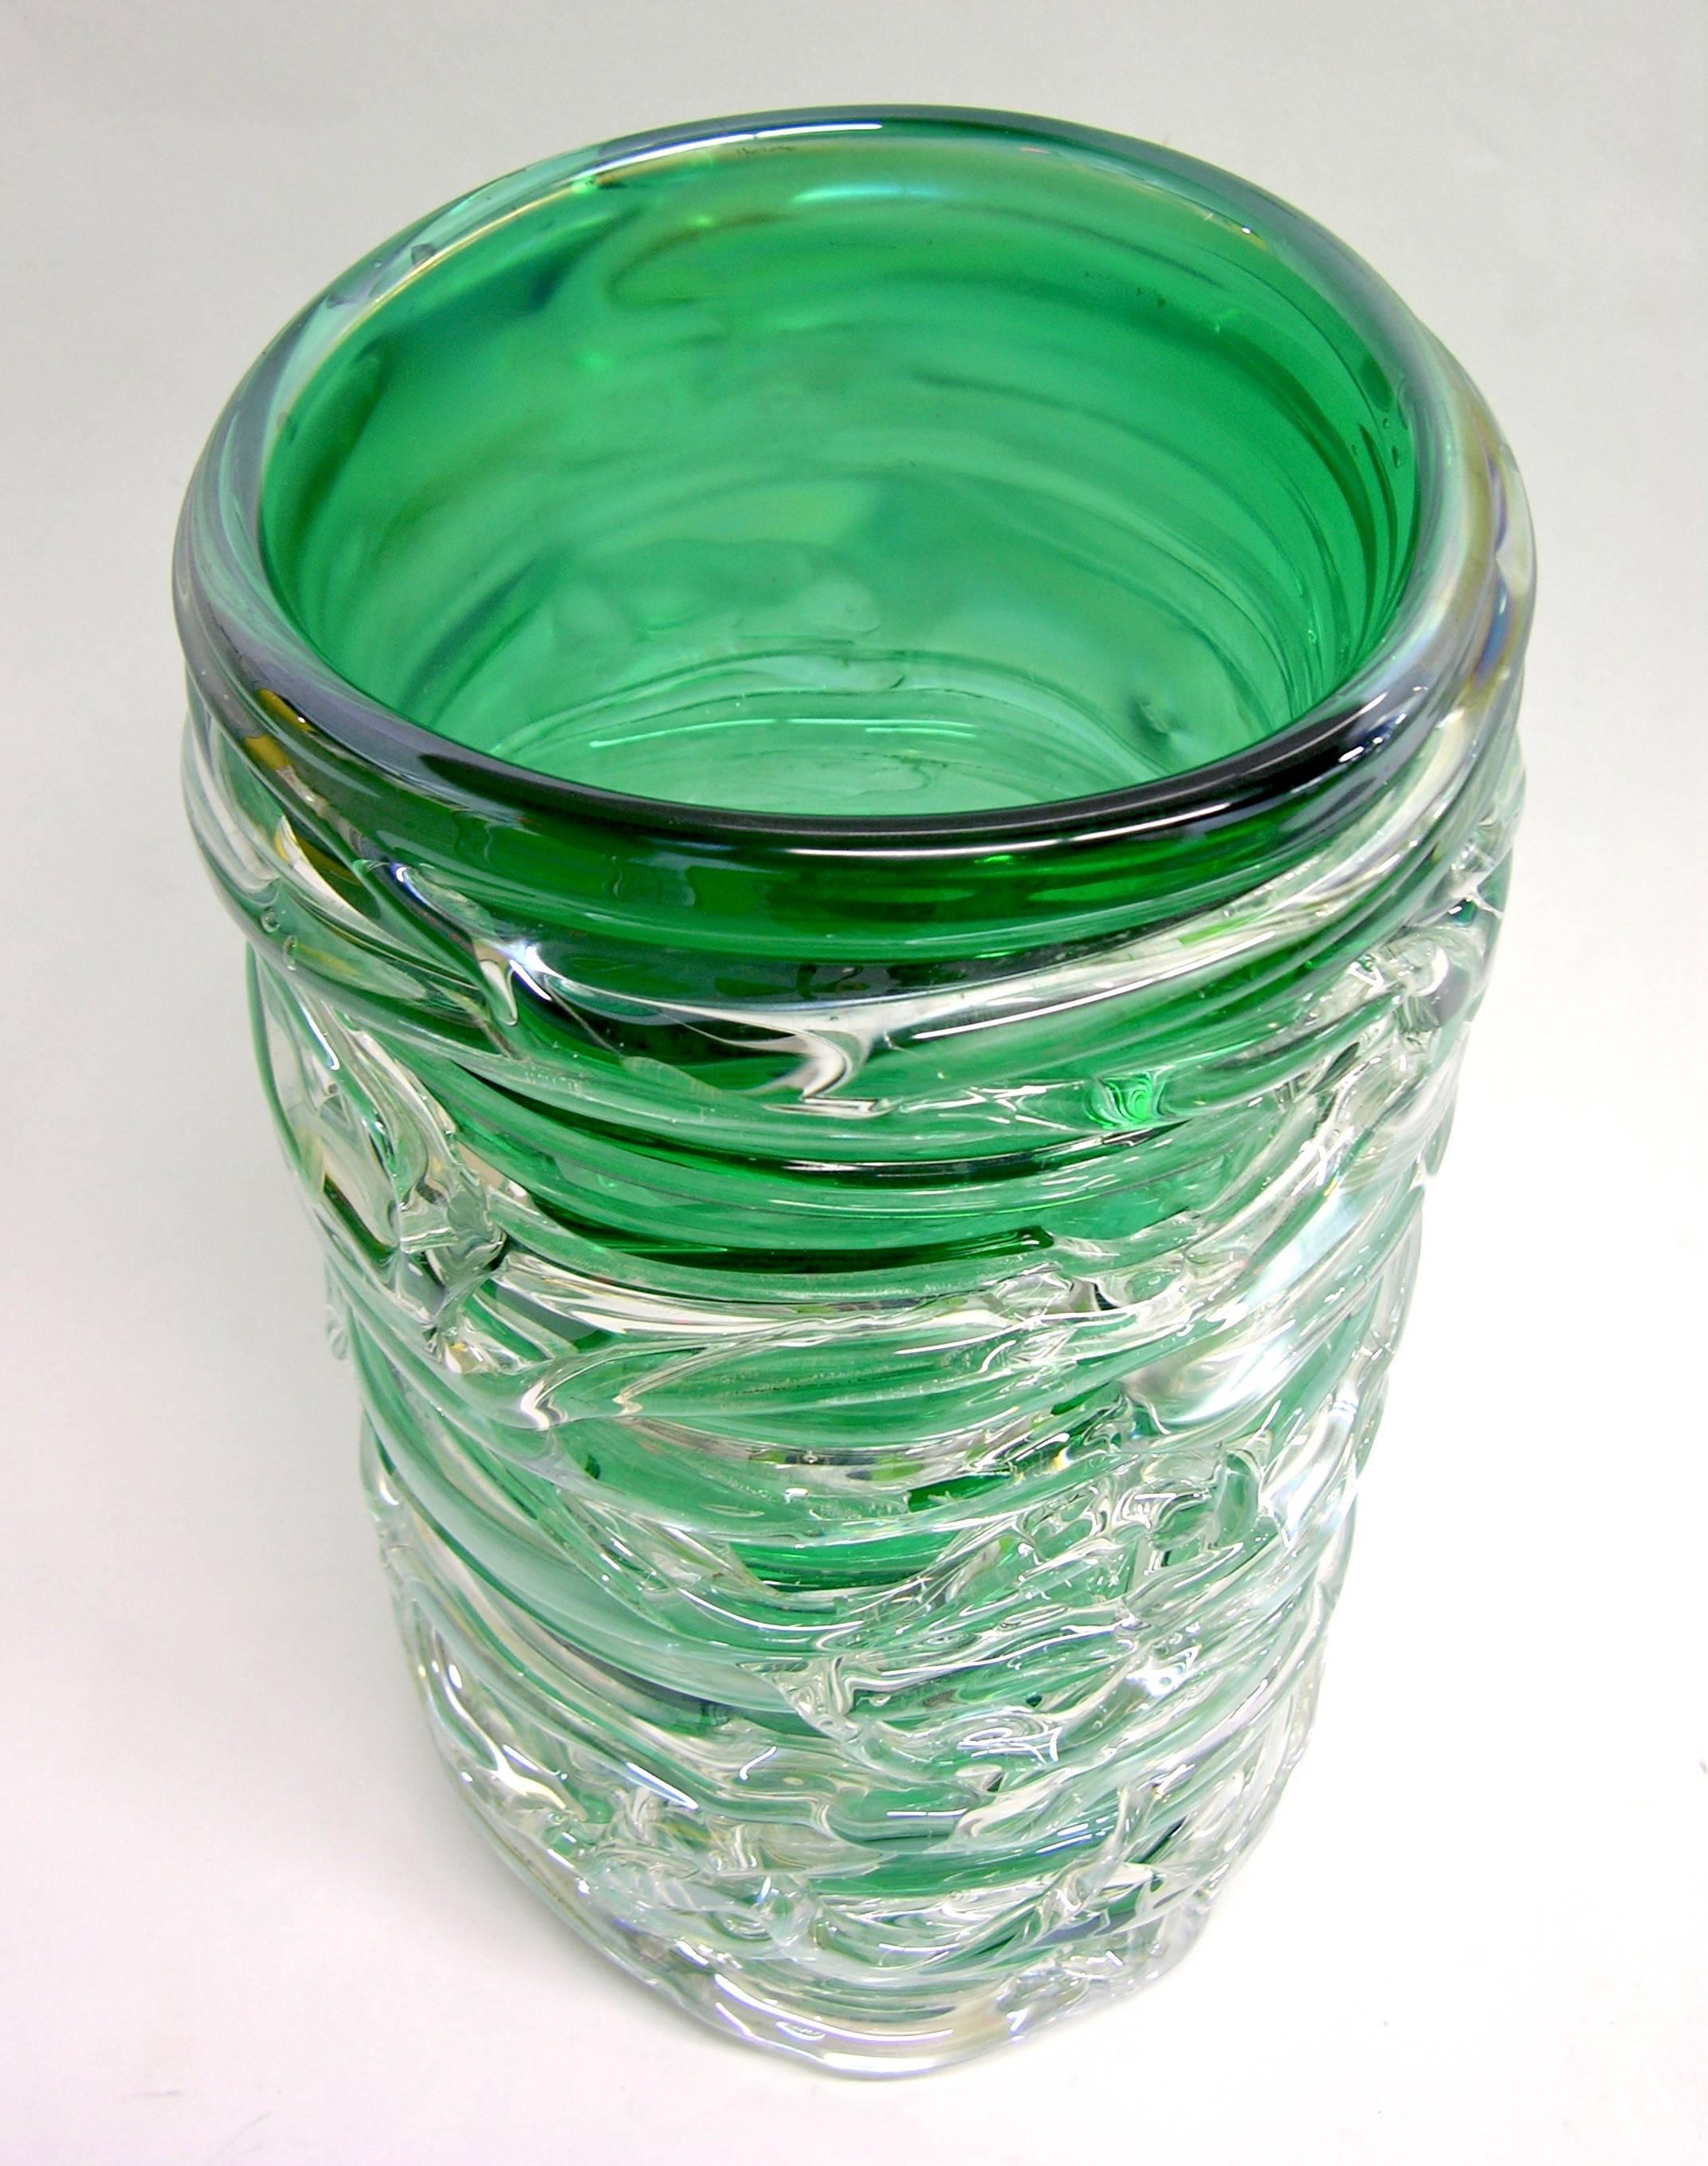 Stunning early 1980 vintage high quality Murano glass vase, unusual deep emerald green body worked with a magnificent iridescence, the body wrapped in clear glass threads freely hand applied in a delicate raised pattern. Signed Camozzo.